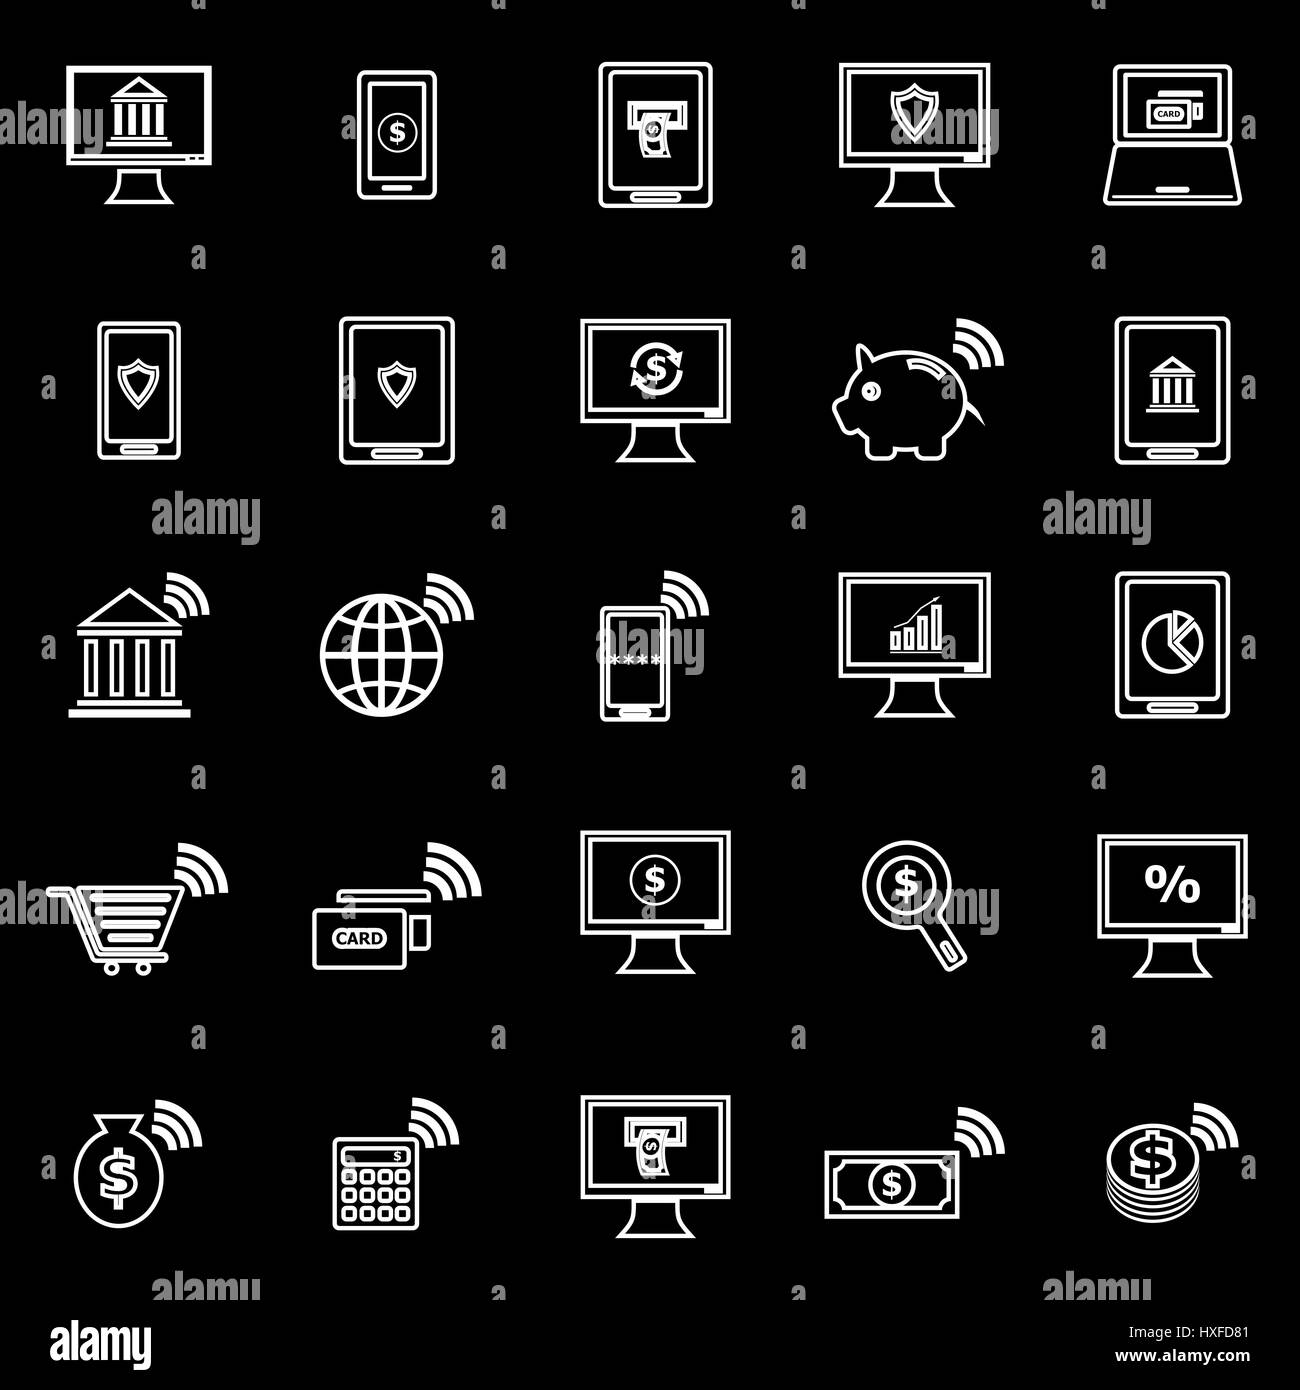 Online banking line icons on black background, stock vector Stock Vector